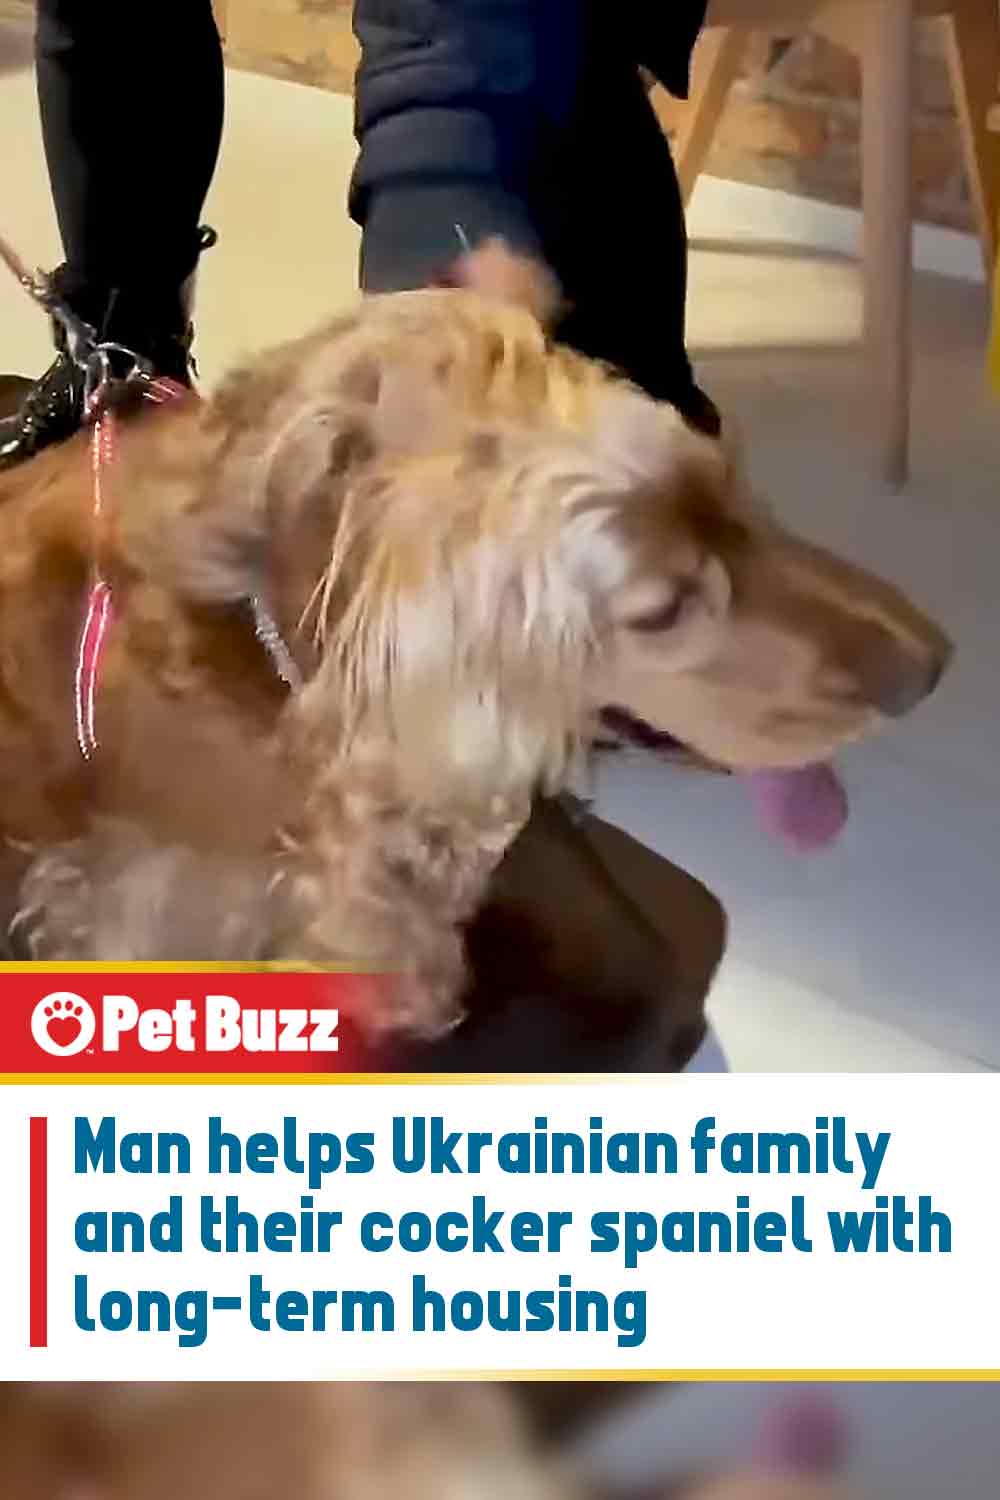 Man helps Ukrainian family and their cocker spaniel with long-term housing